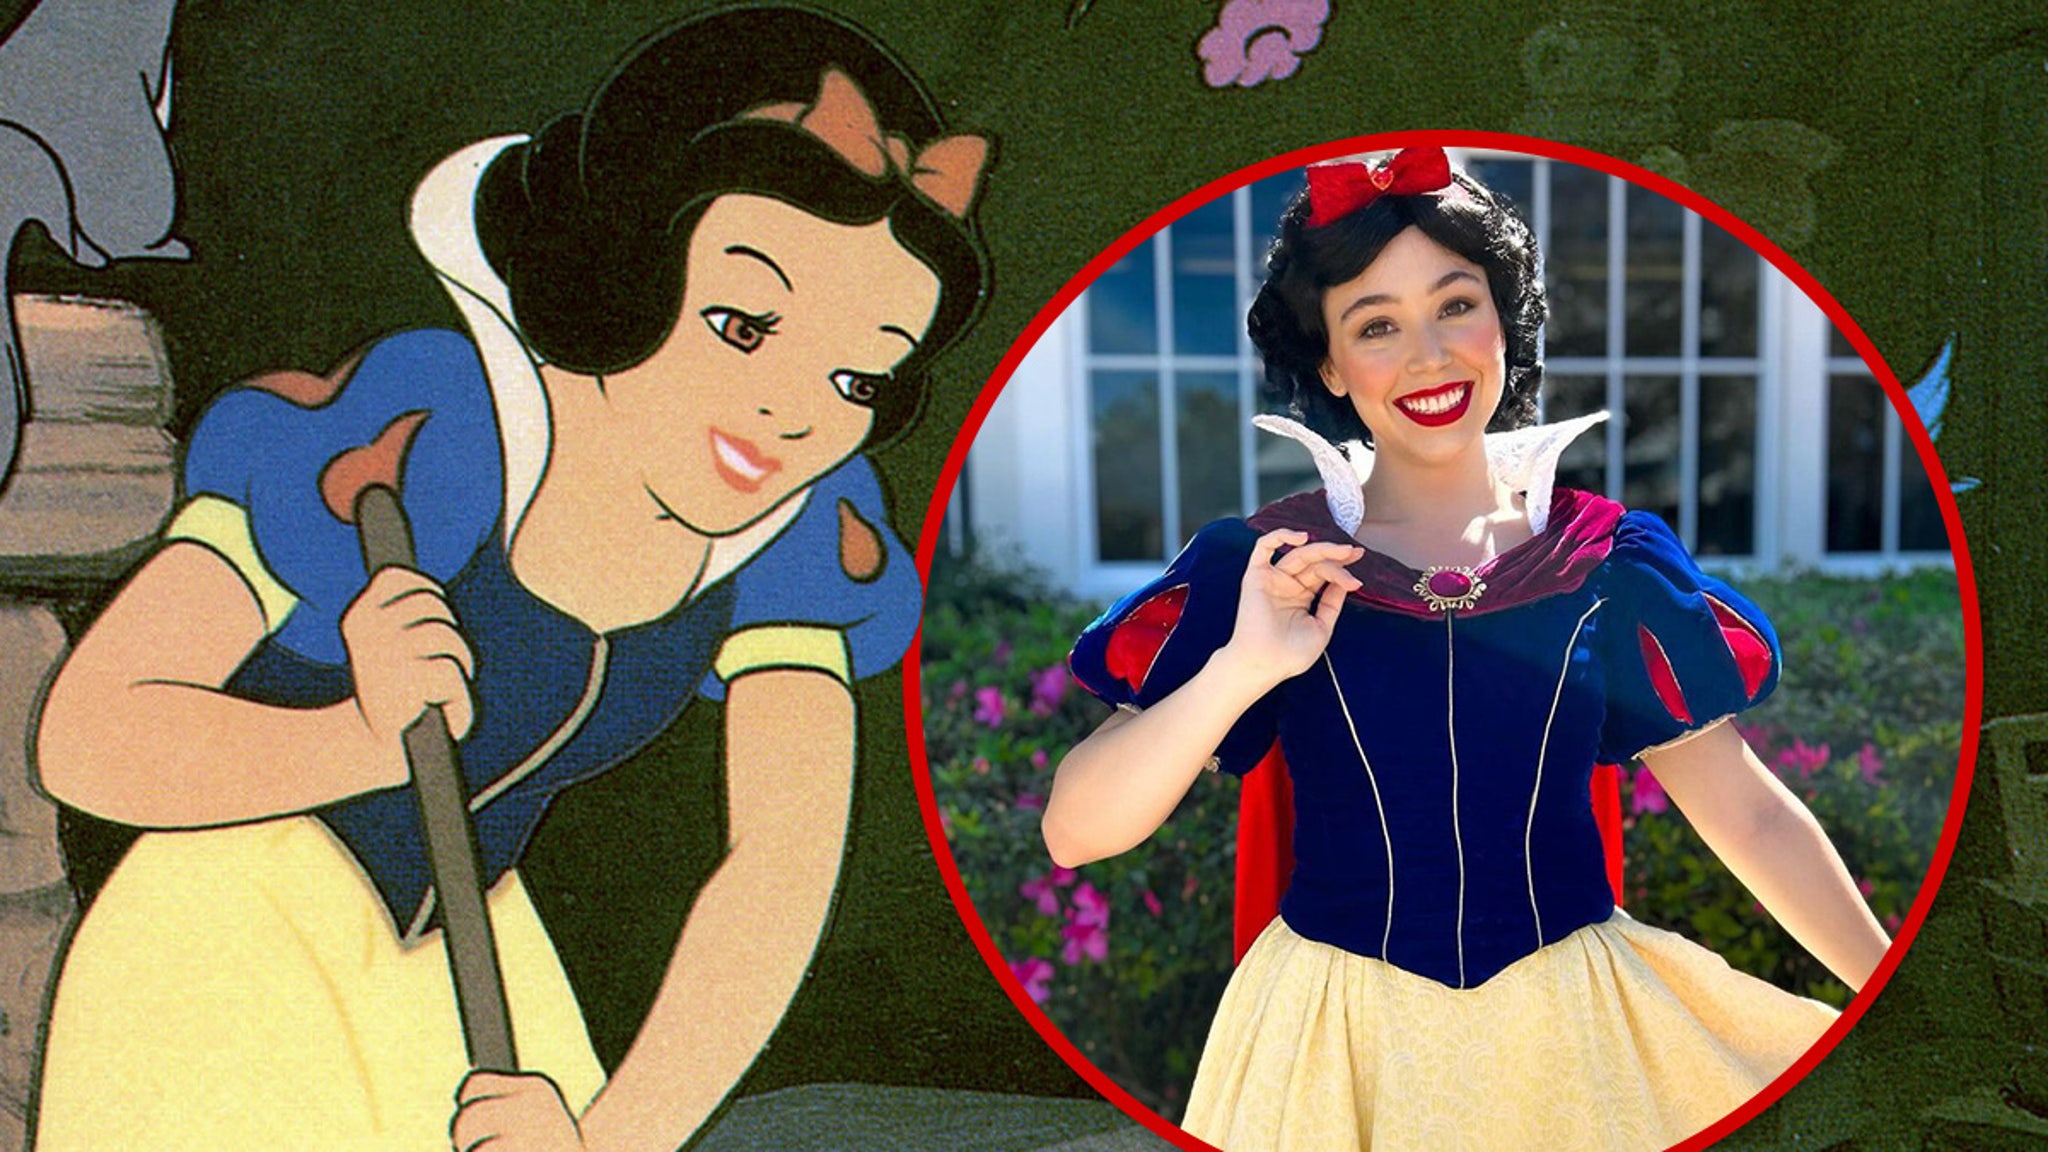 Disney Actor Claims She Was Fired For Posting As Snow White